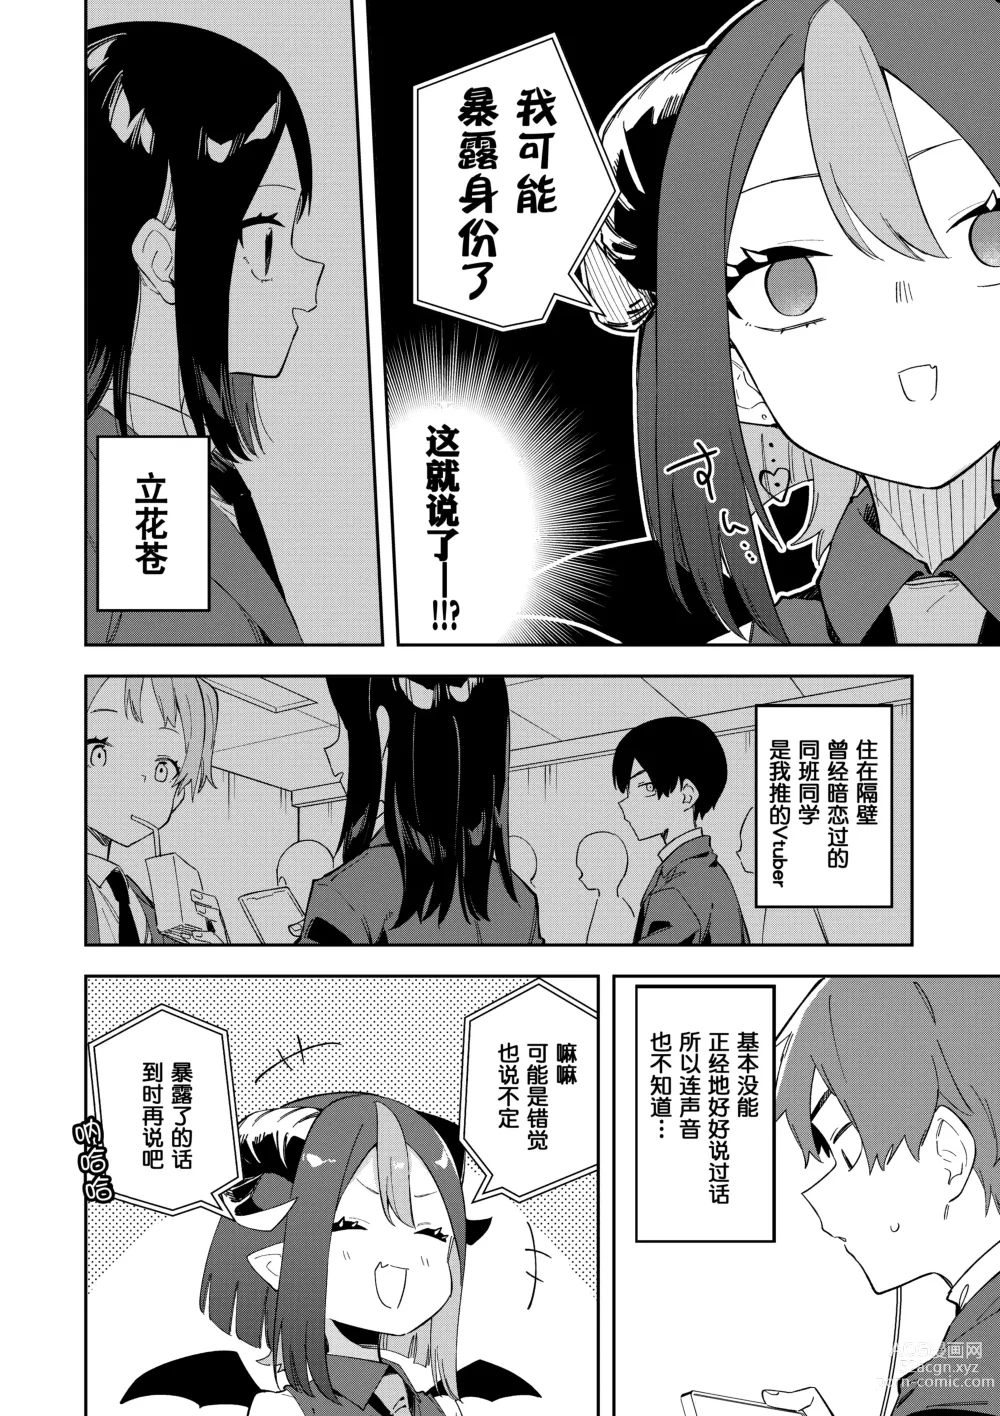 Page 6 of doujinshi 隣人は有名配信者3人目